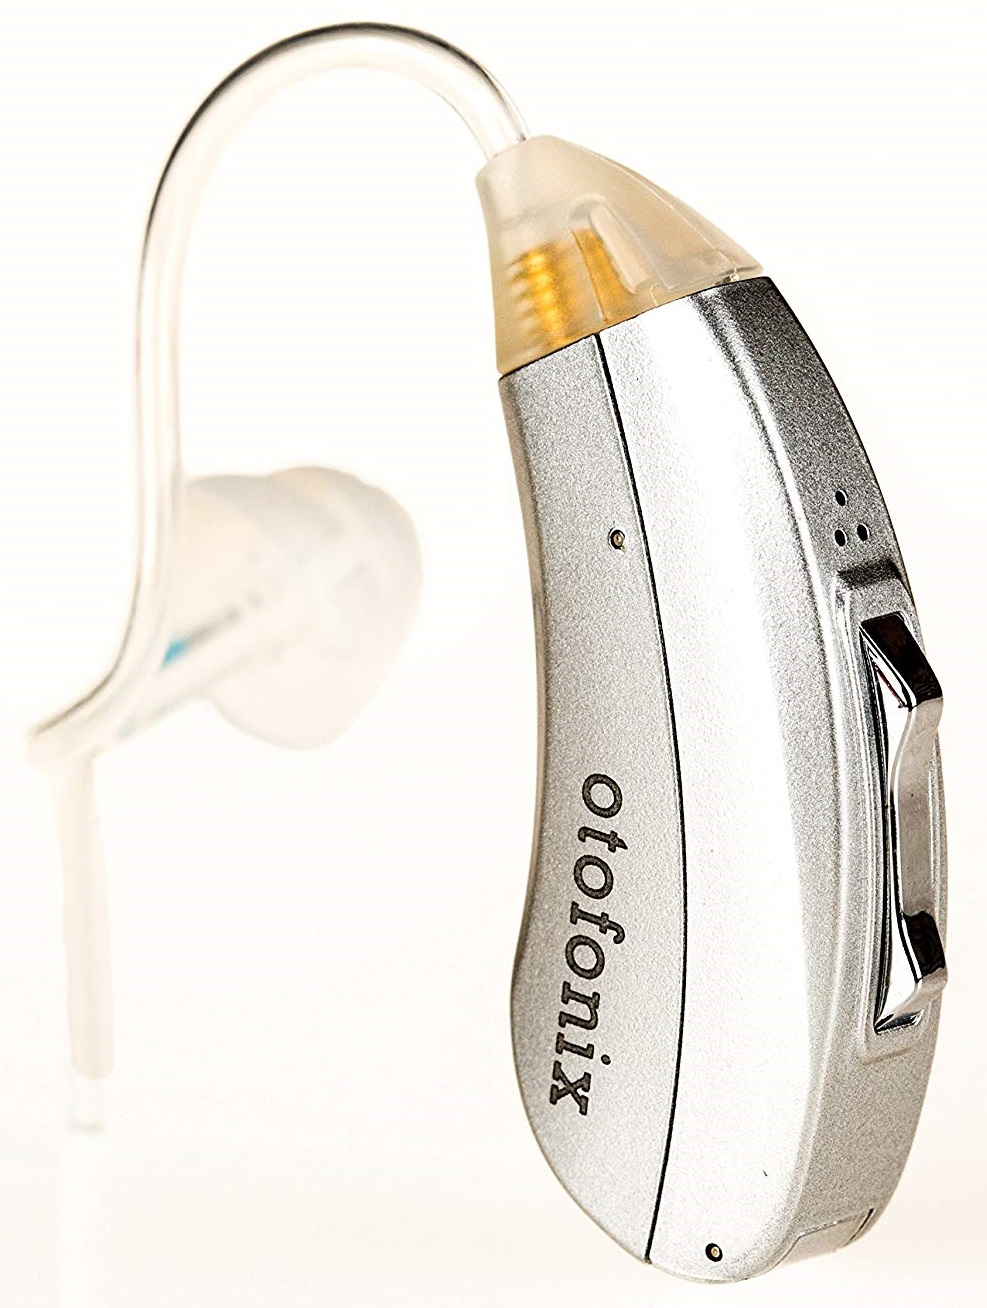 Best Hearing Aids For Severe High-Frequency Hearing Loss 2020